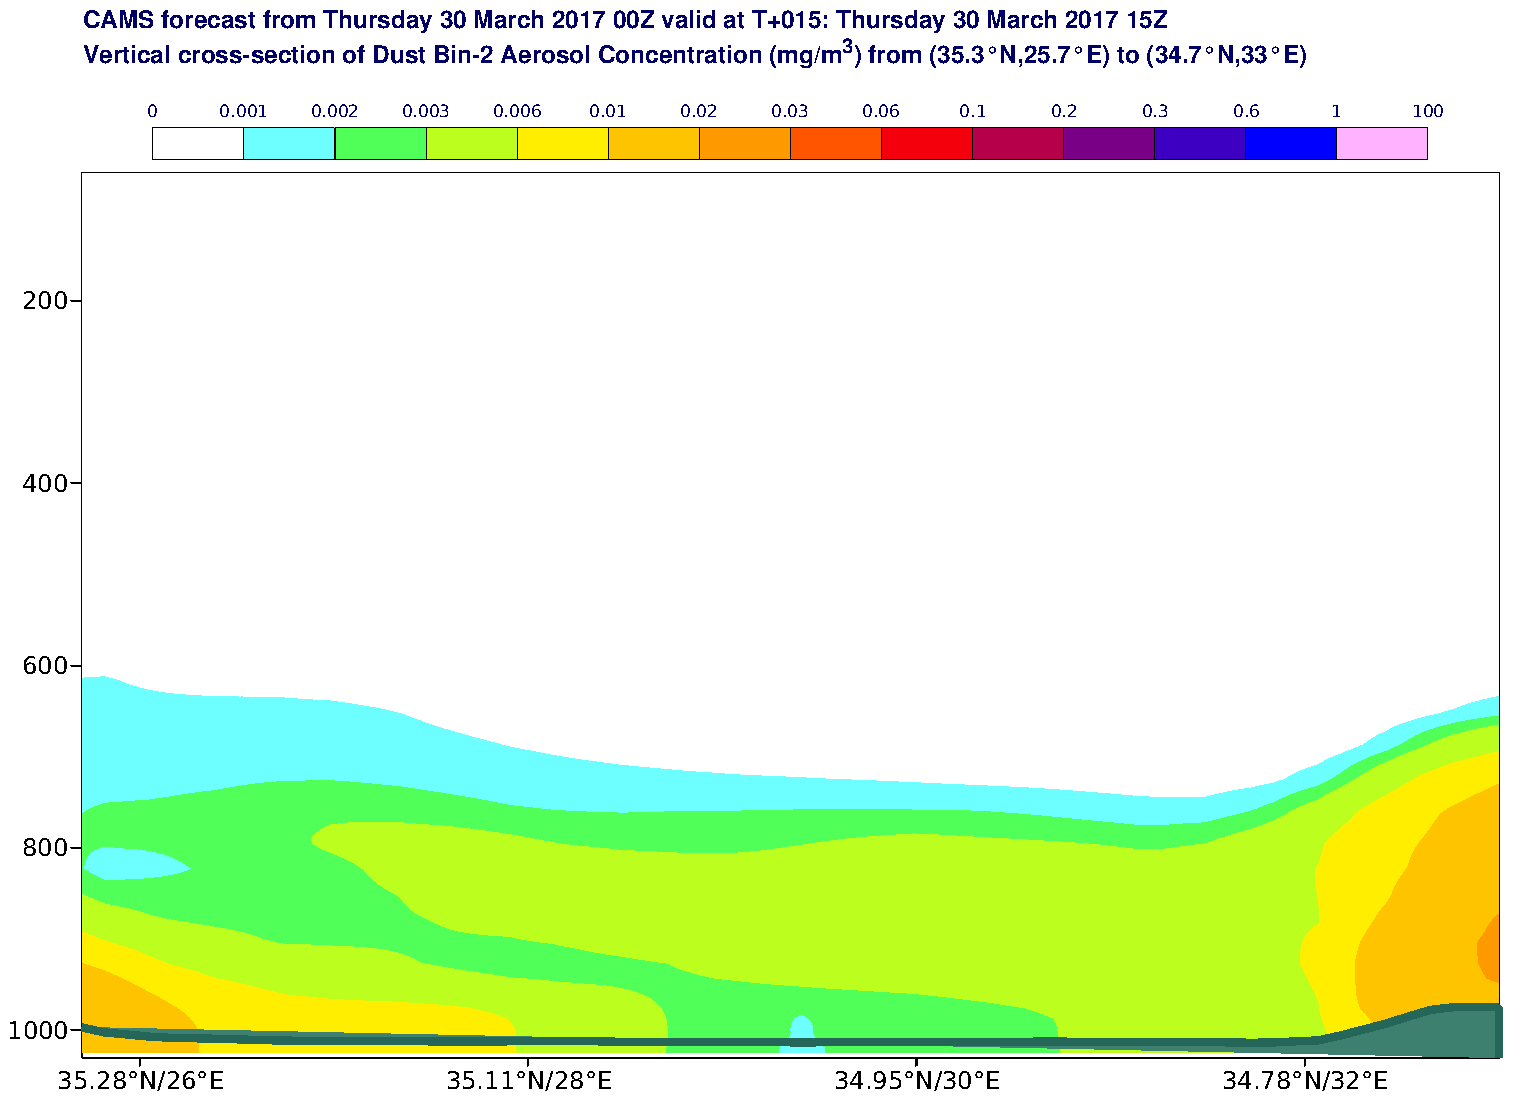 Vertical cross-section of Dust Bin-2 Aerosol Concentration (mg/m3) valid at T15 - 2017-03-30 15:00